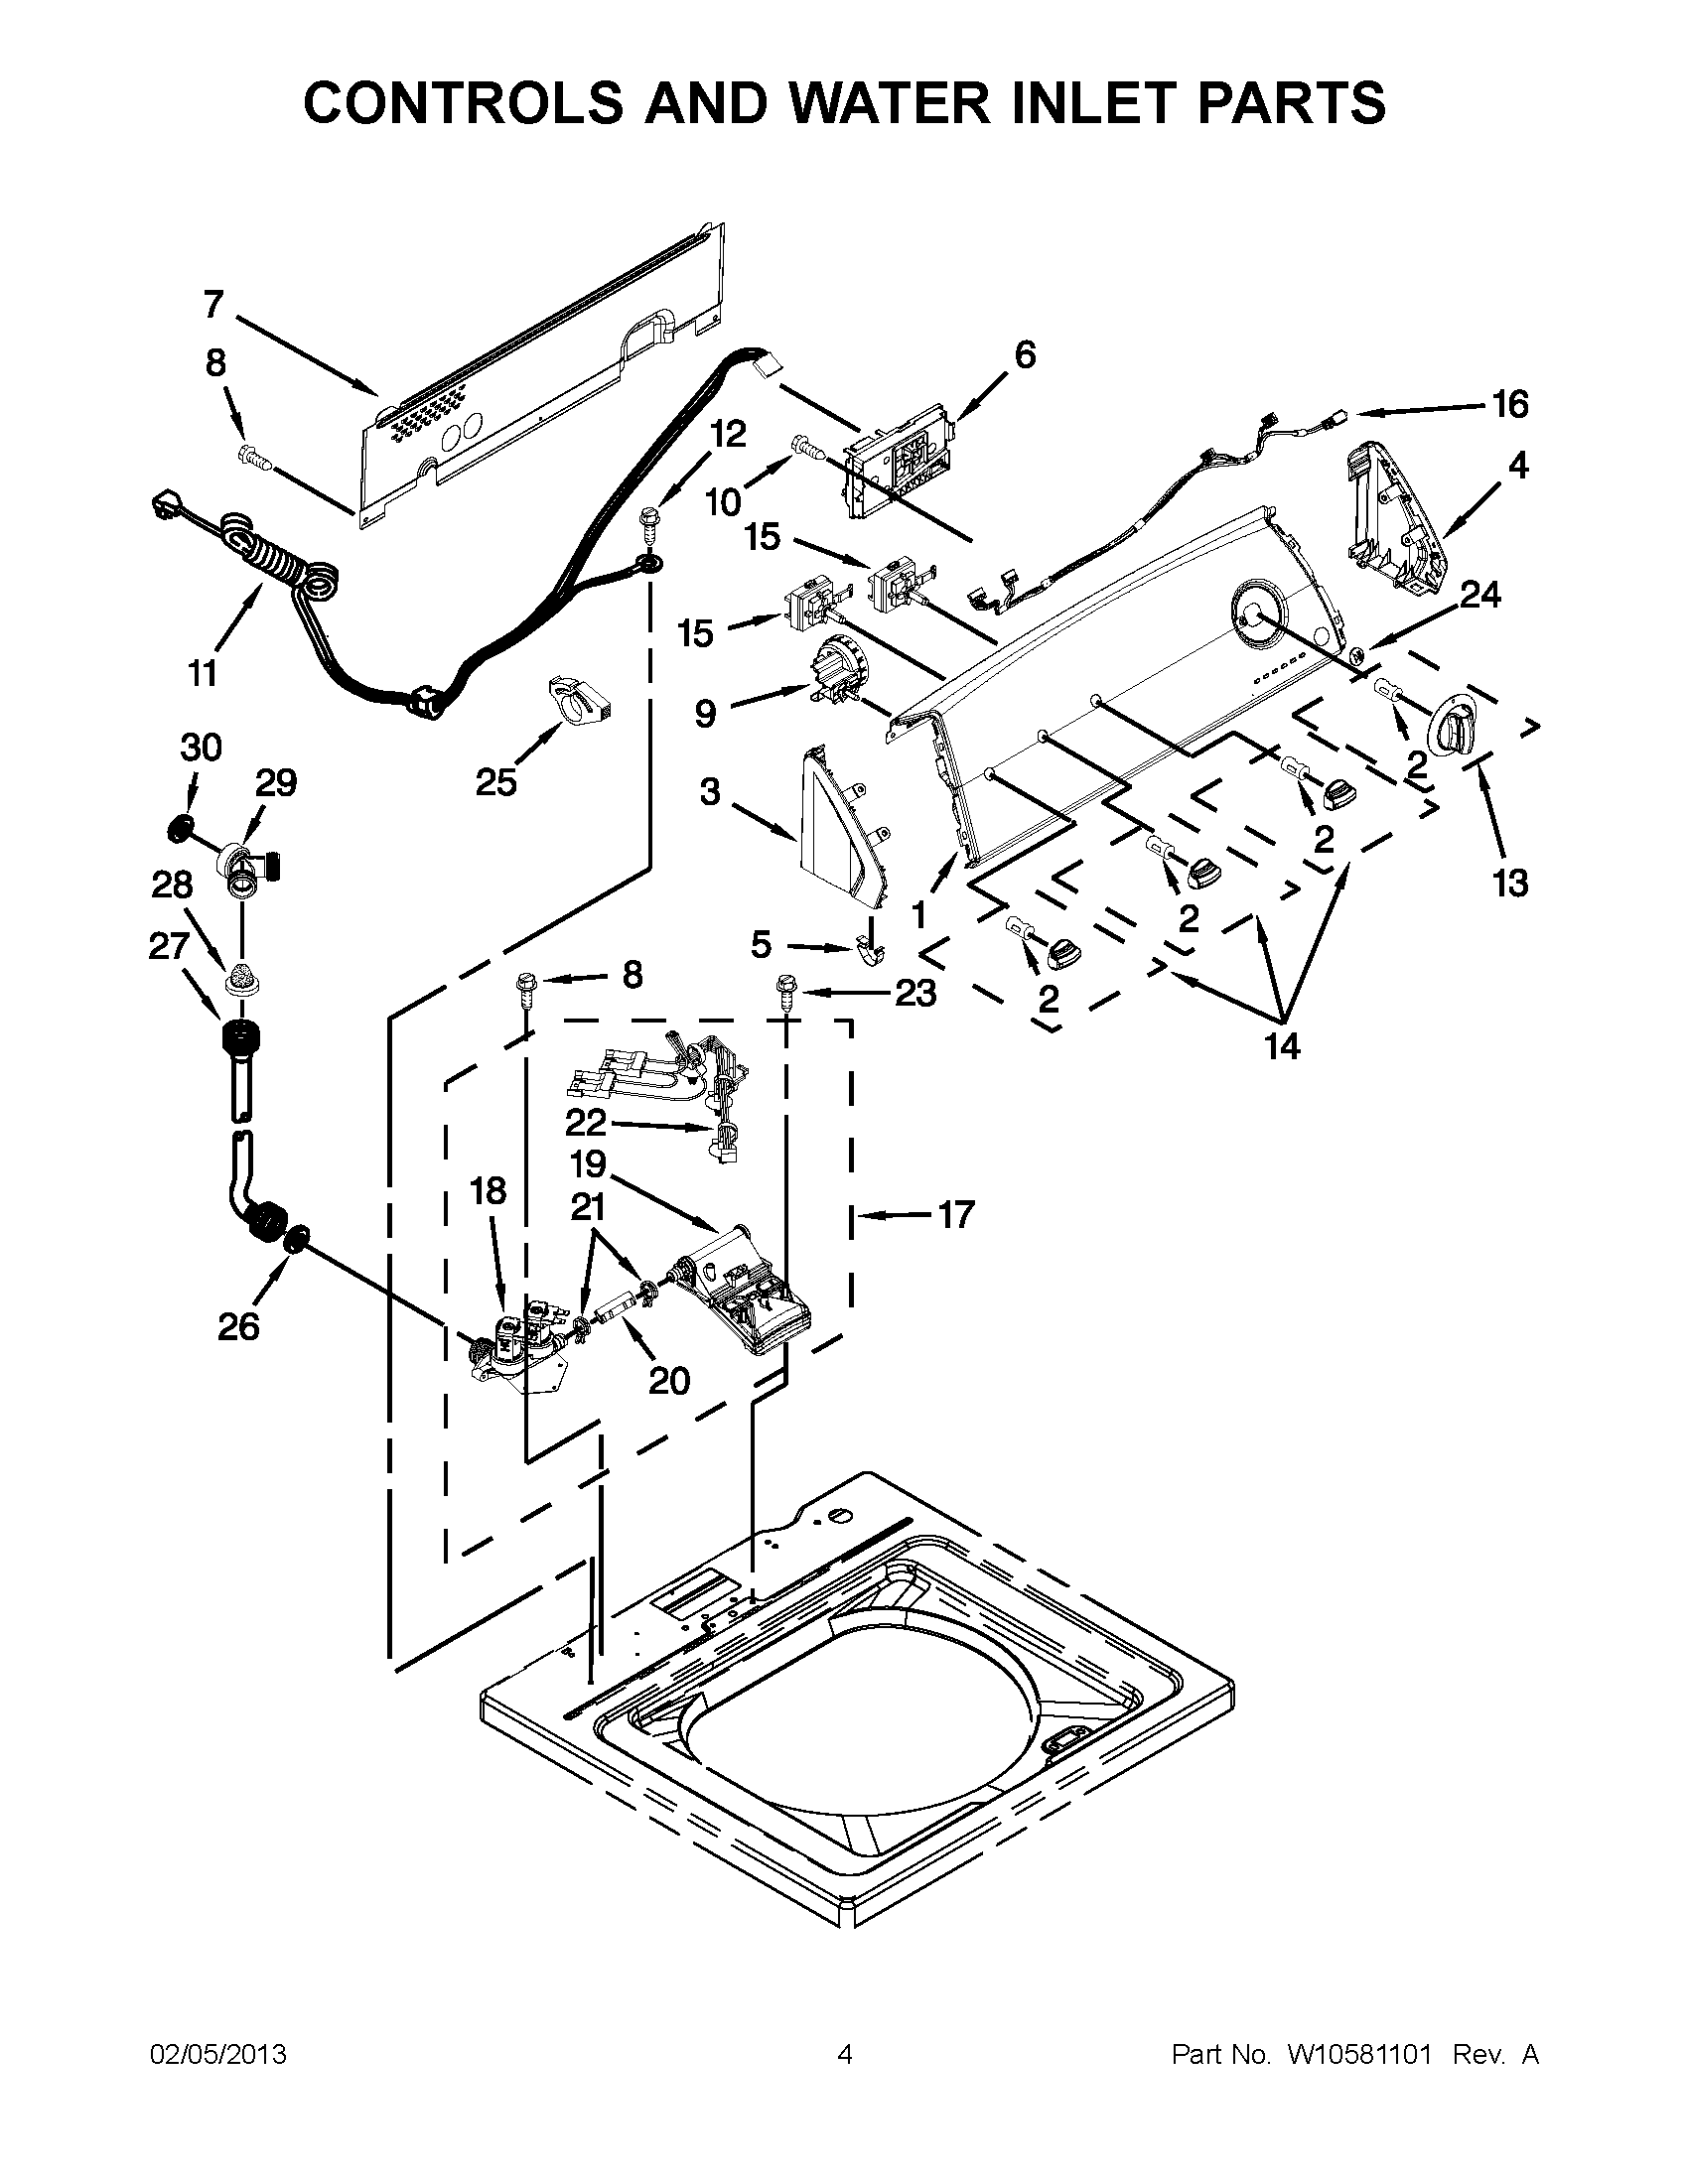 02 - CONTROLS AND WATER INLET PARTS